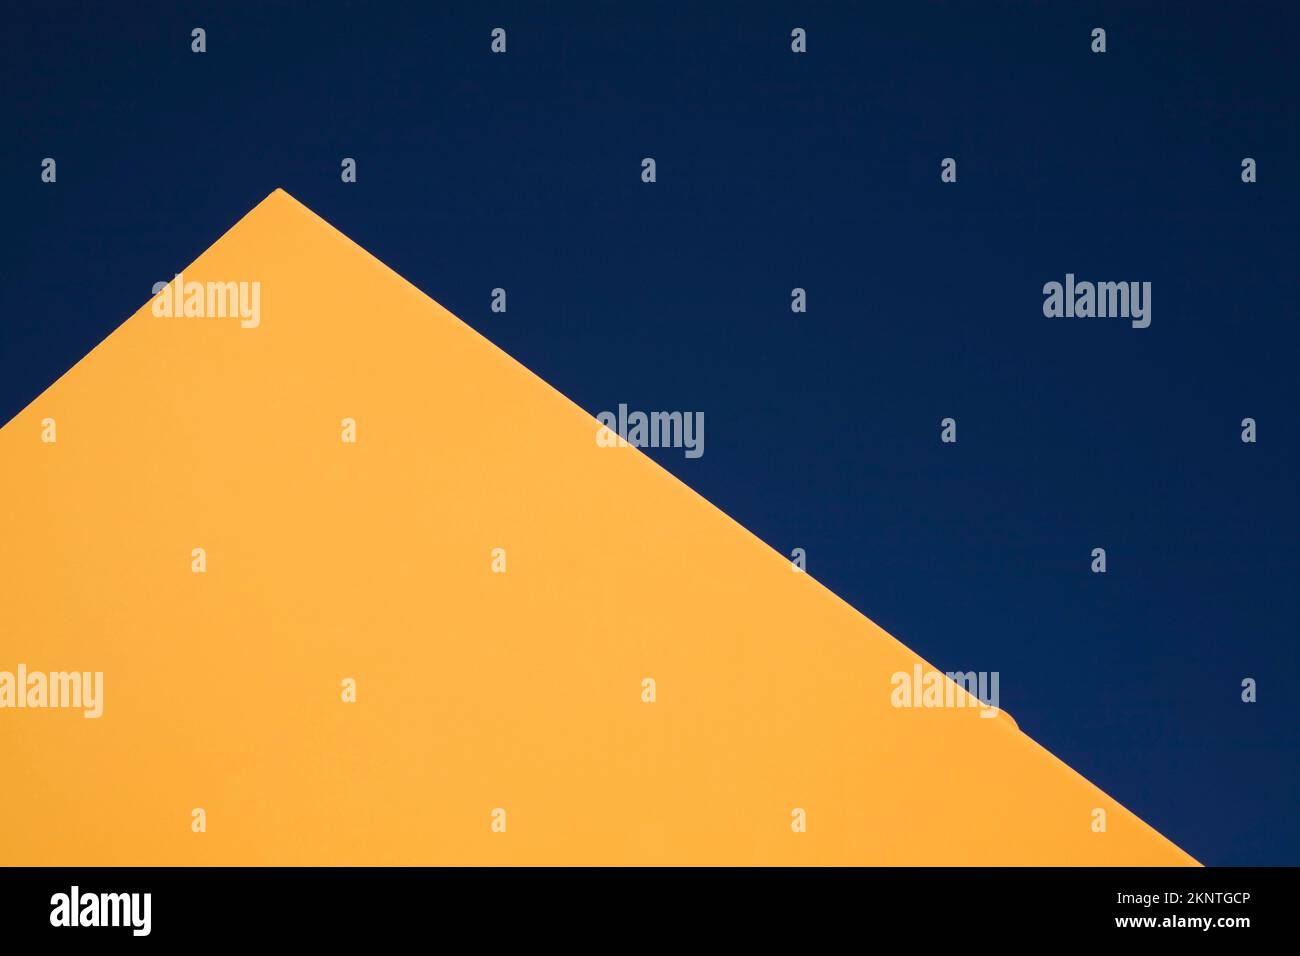 Partial view of a flat yellow metal shaped pyramid against a blue sky background. Stock Photo